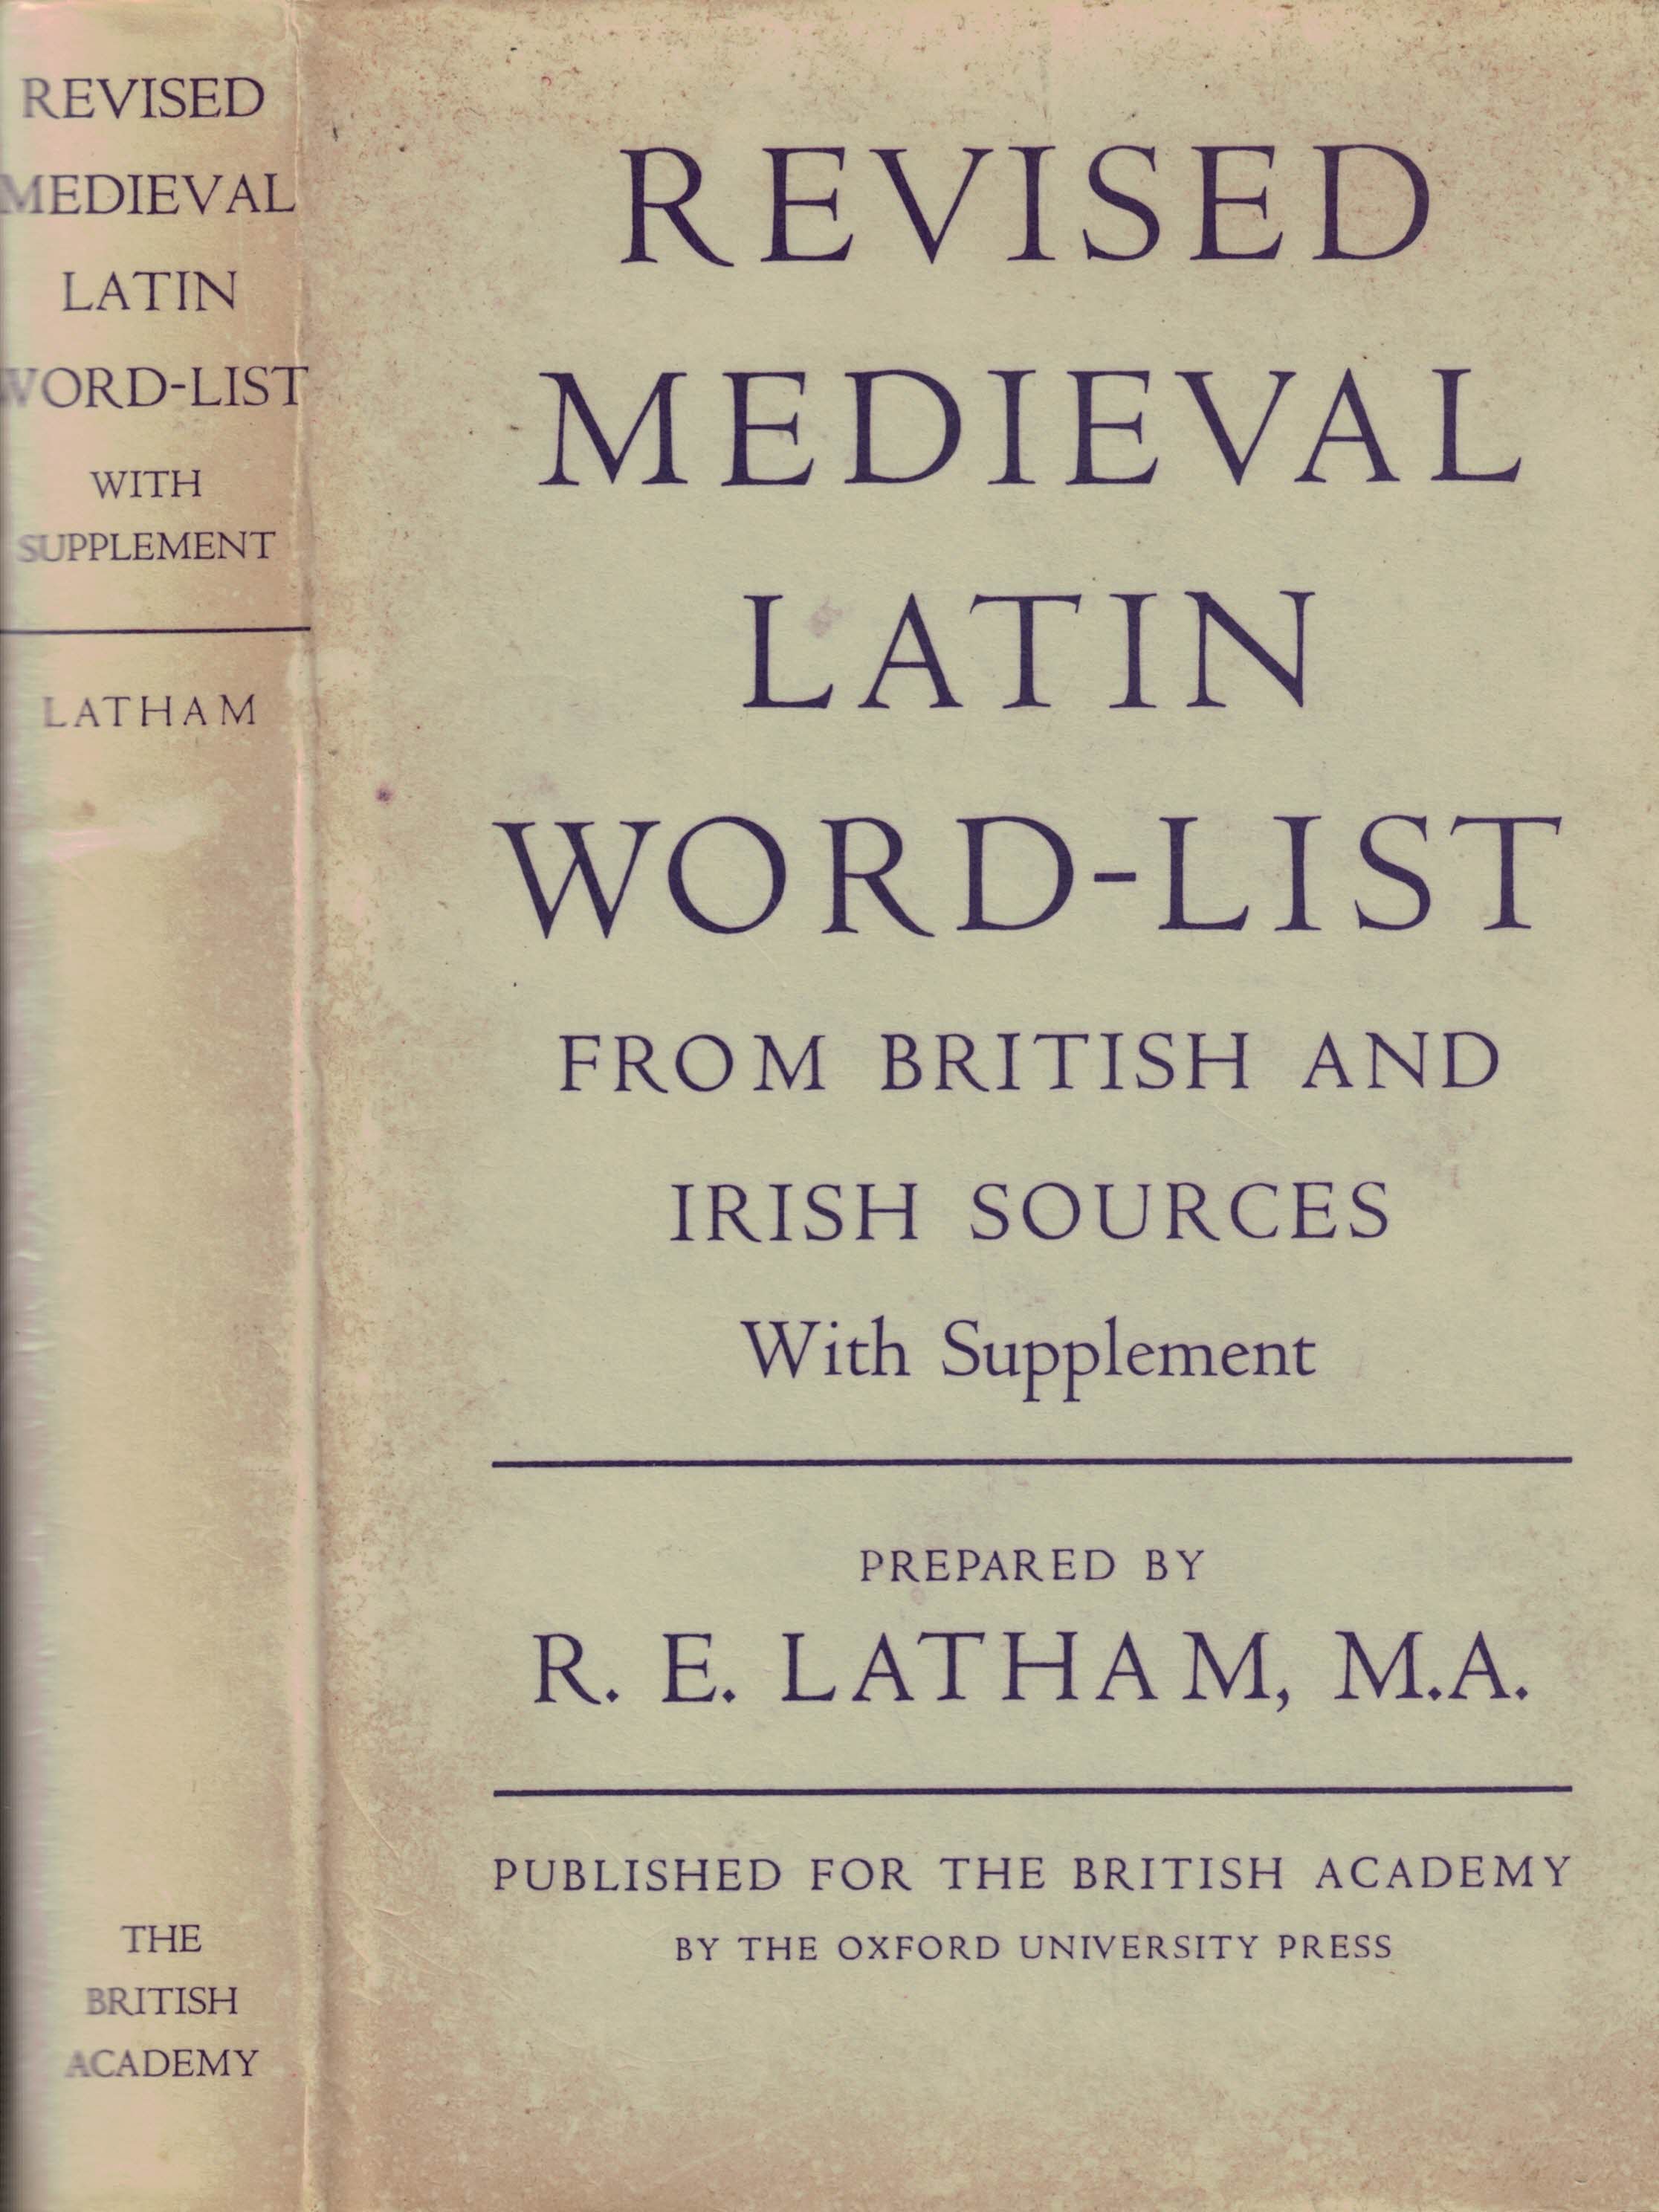 Revised Medieval Latin Word-List from British and Irish Sources. With Supplement.